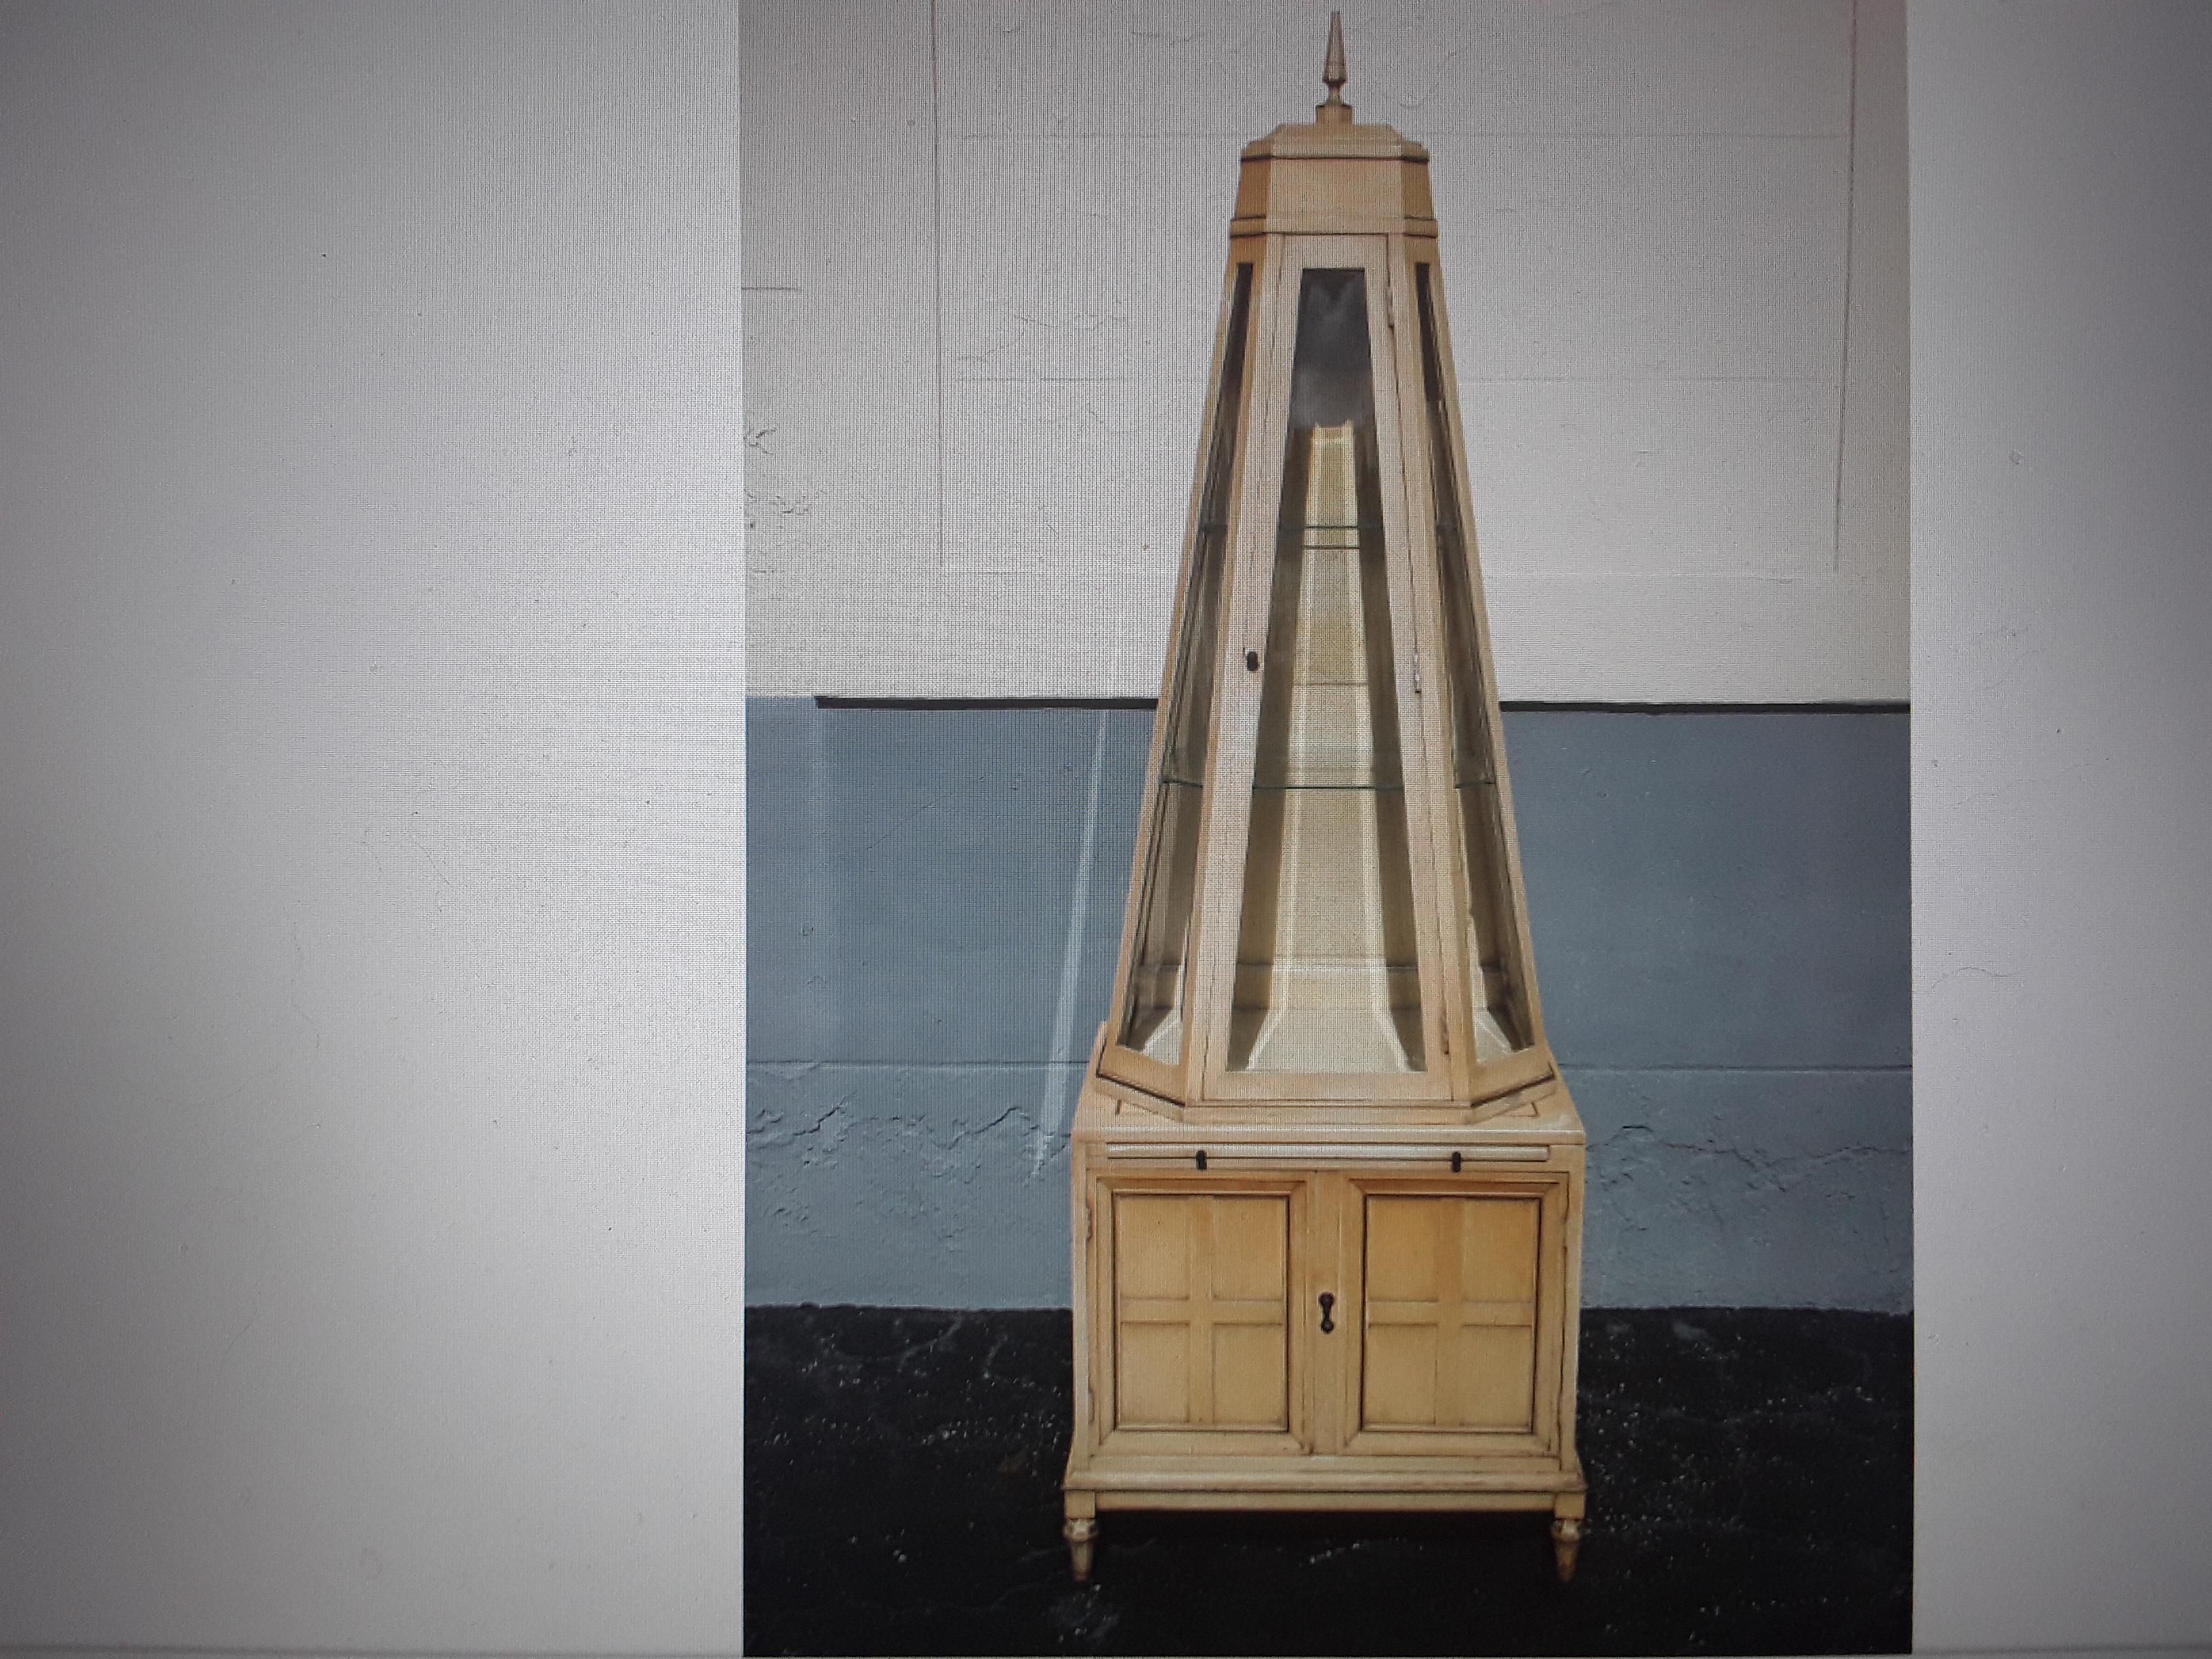 Rare Form 1960's Mid Century Modern Obelisk Display Case/ Secretary/ Cabinet. This is the first time I have seen one like this. There is a writing area, storage cabinets and upper glass display case.
